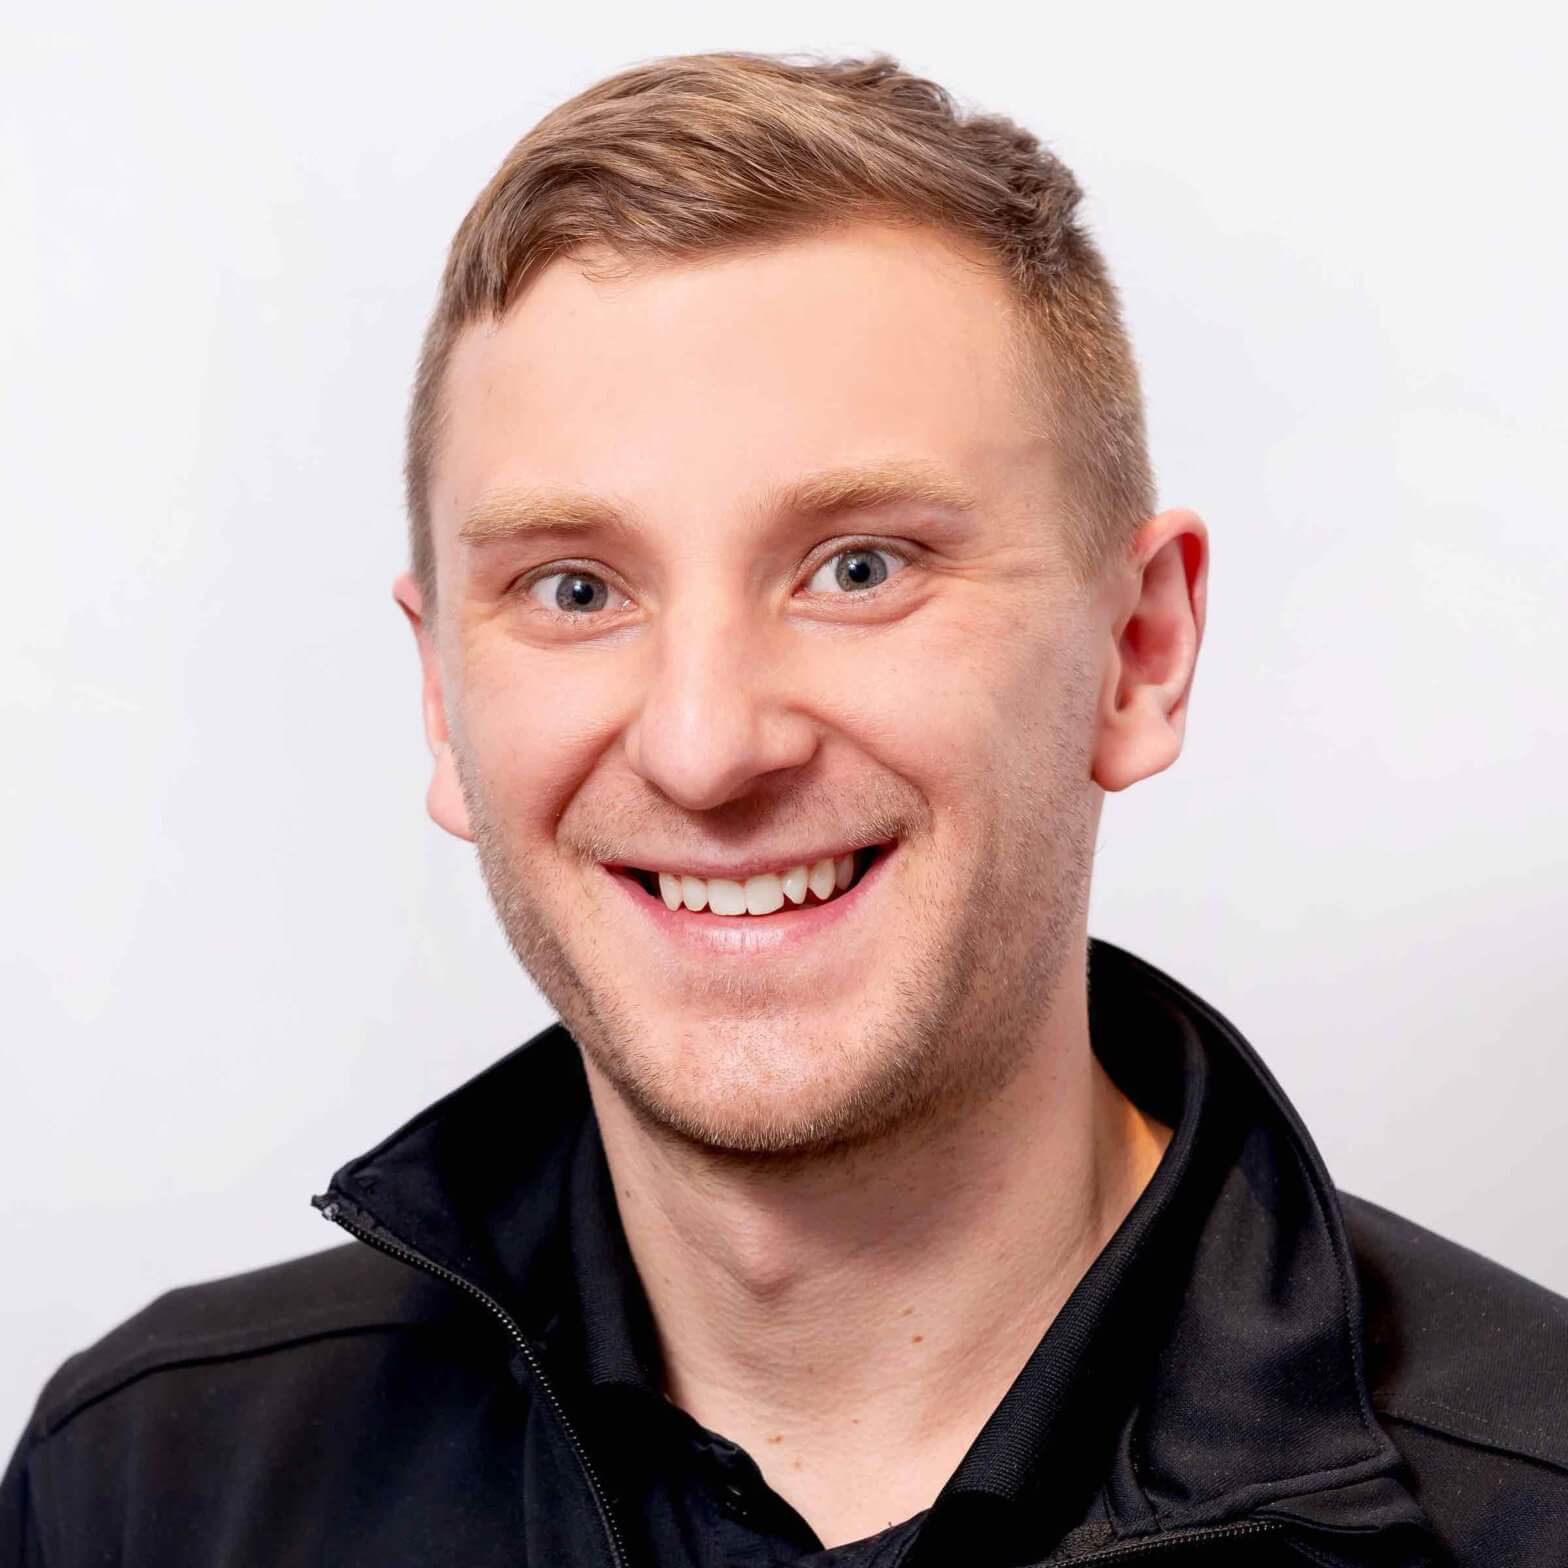 Mackenzie Fast provides physiotherapy to a wide range of clients in Saskatoon, SK. He has a focus on concussion management and the treatment of orthopaedic injuries.